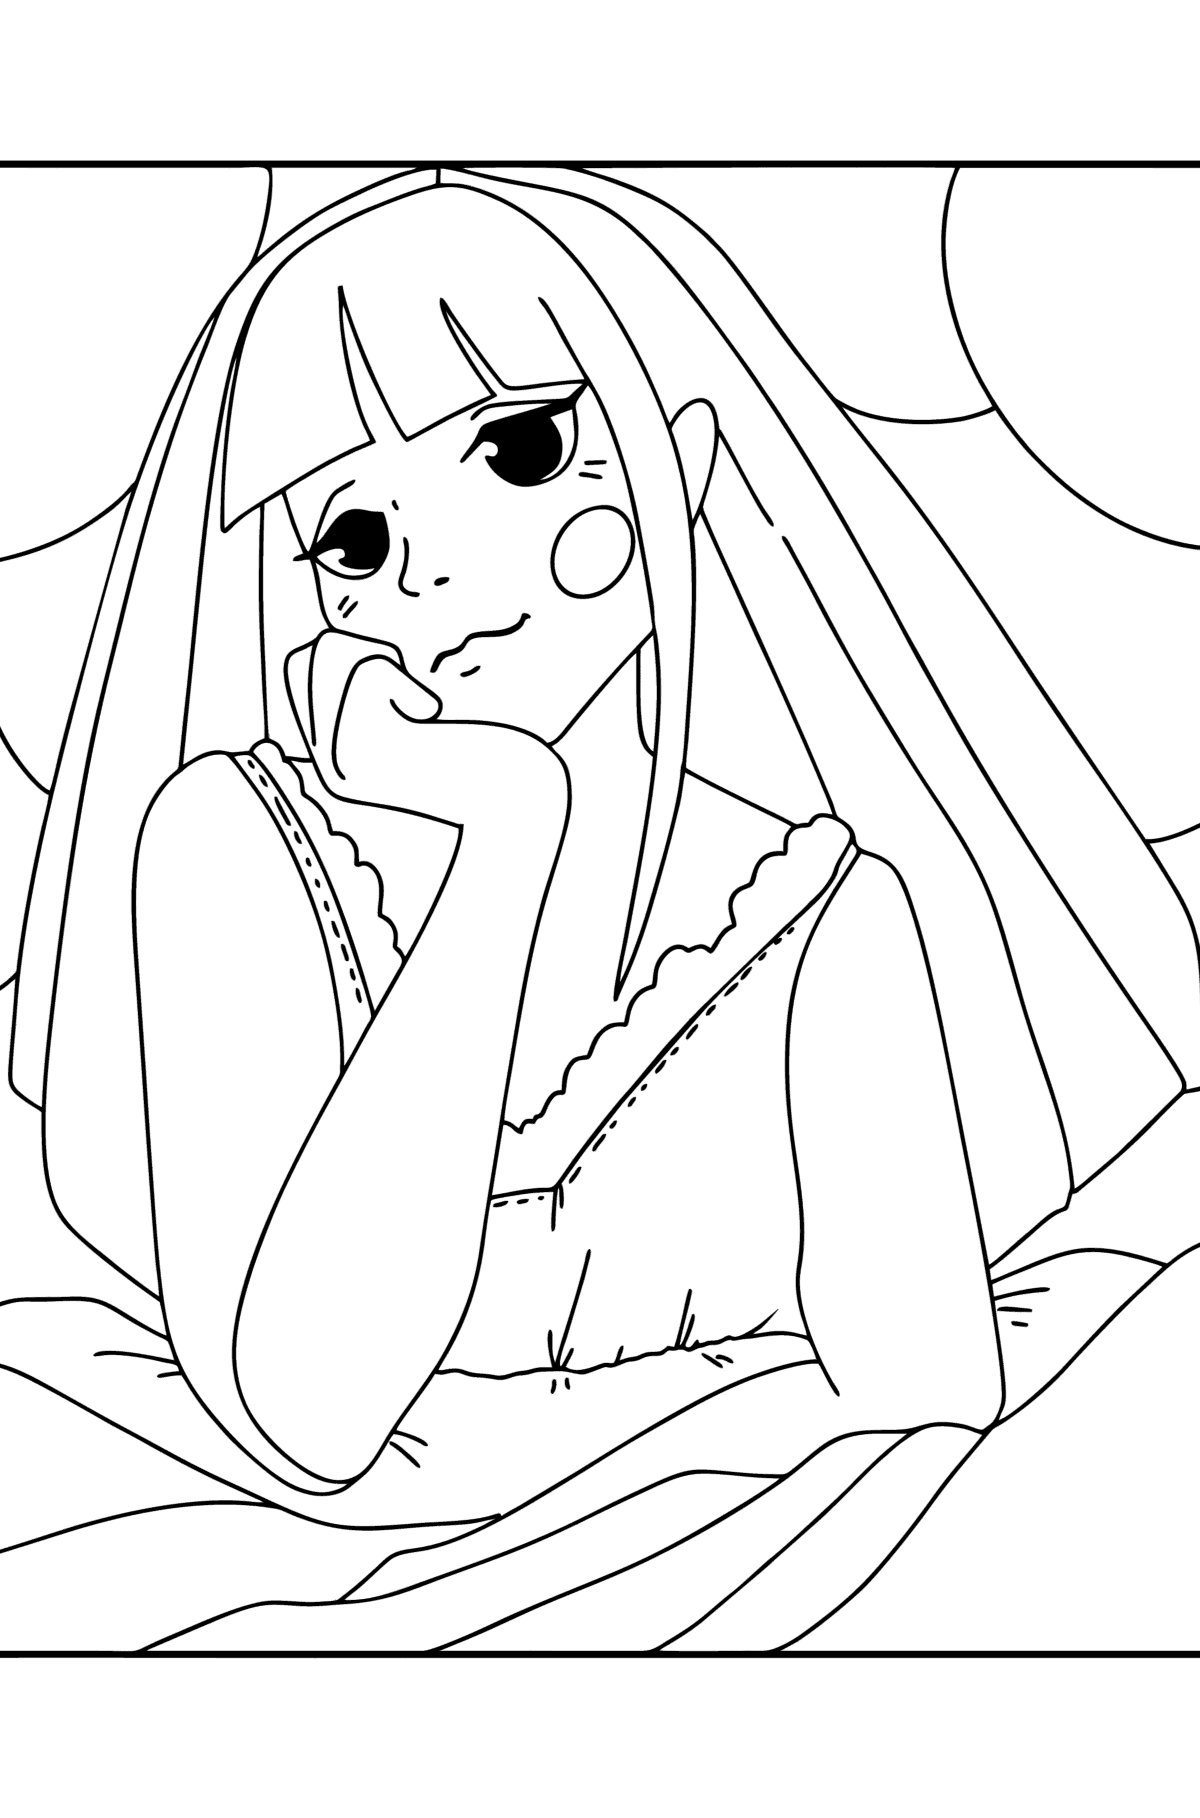 Teenage anime girl coloring page - Coloring Pages for Kids